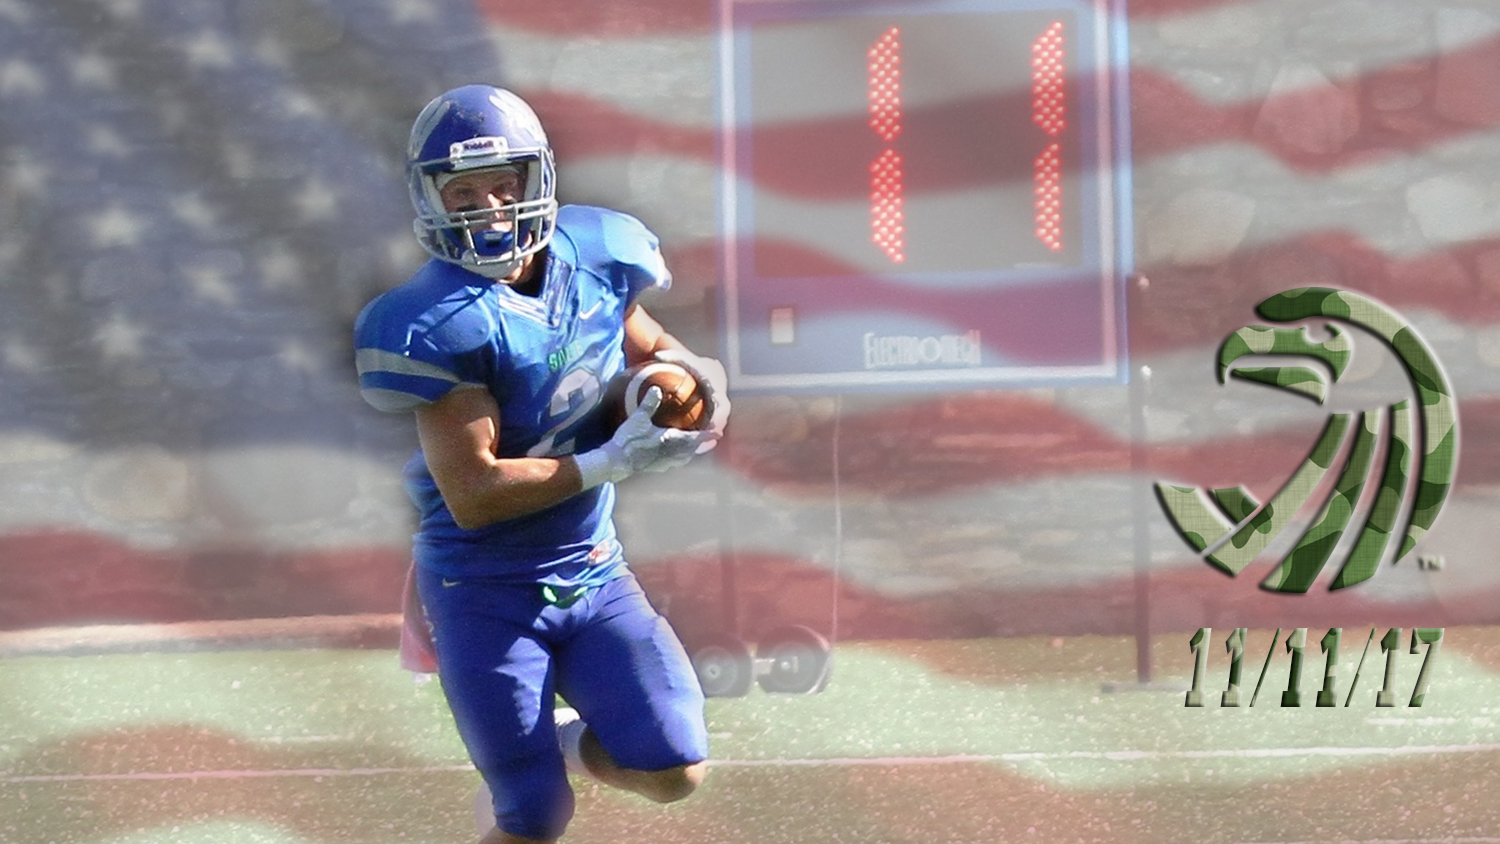 11/11/17: Military Appreciation on Veterans' Day, Senior Day, SAAC Food Drive, Sigma Theta Tau relief aid for hurricane victims ... Salve Regina football hosts Curry on Sat. (12 p.m.) at Toppa Field